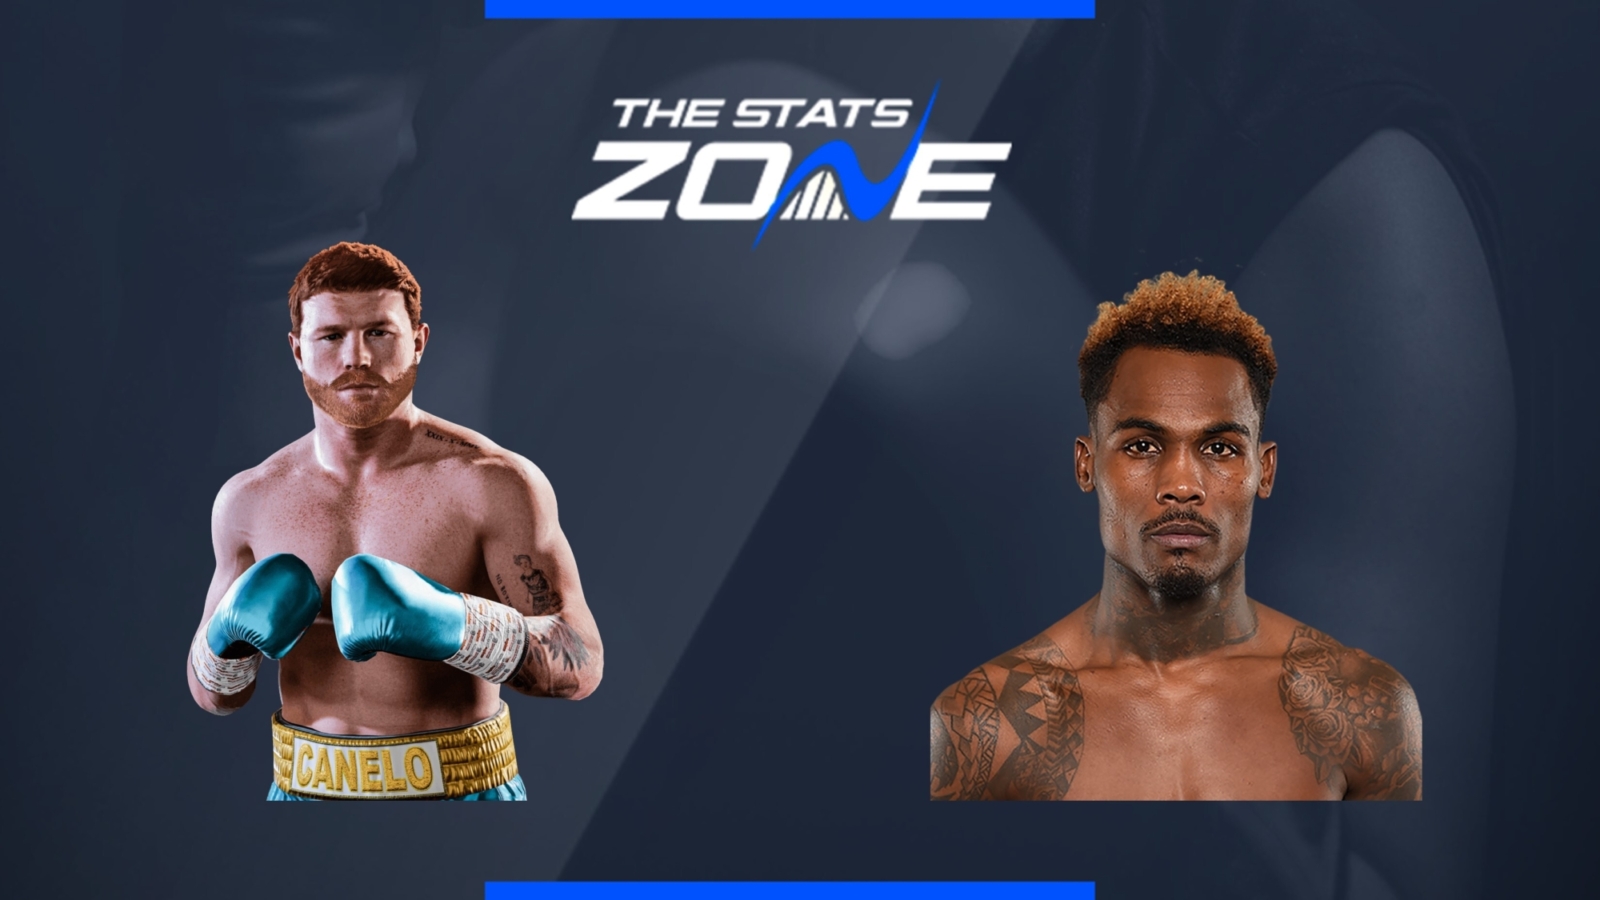 Saul Canelo Alvarez vs Jermell Charlo start time, undercard, TV channel, streaming info and fight prediction